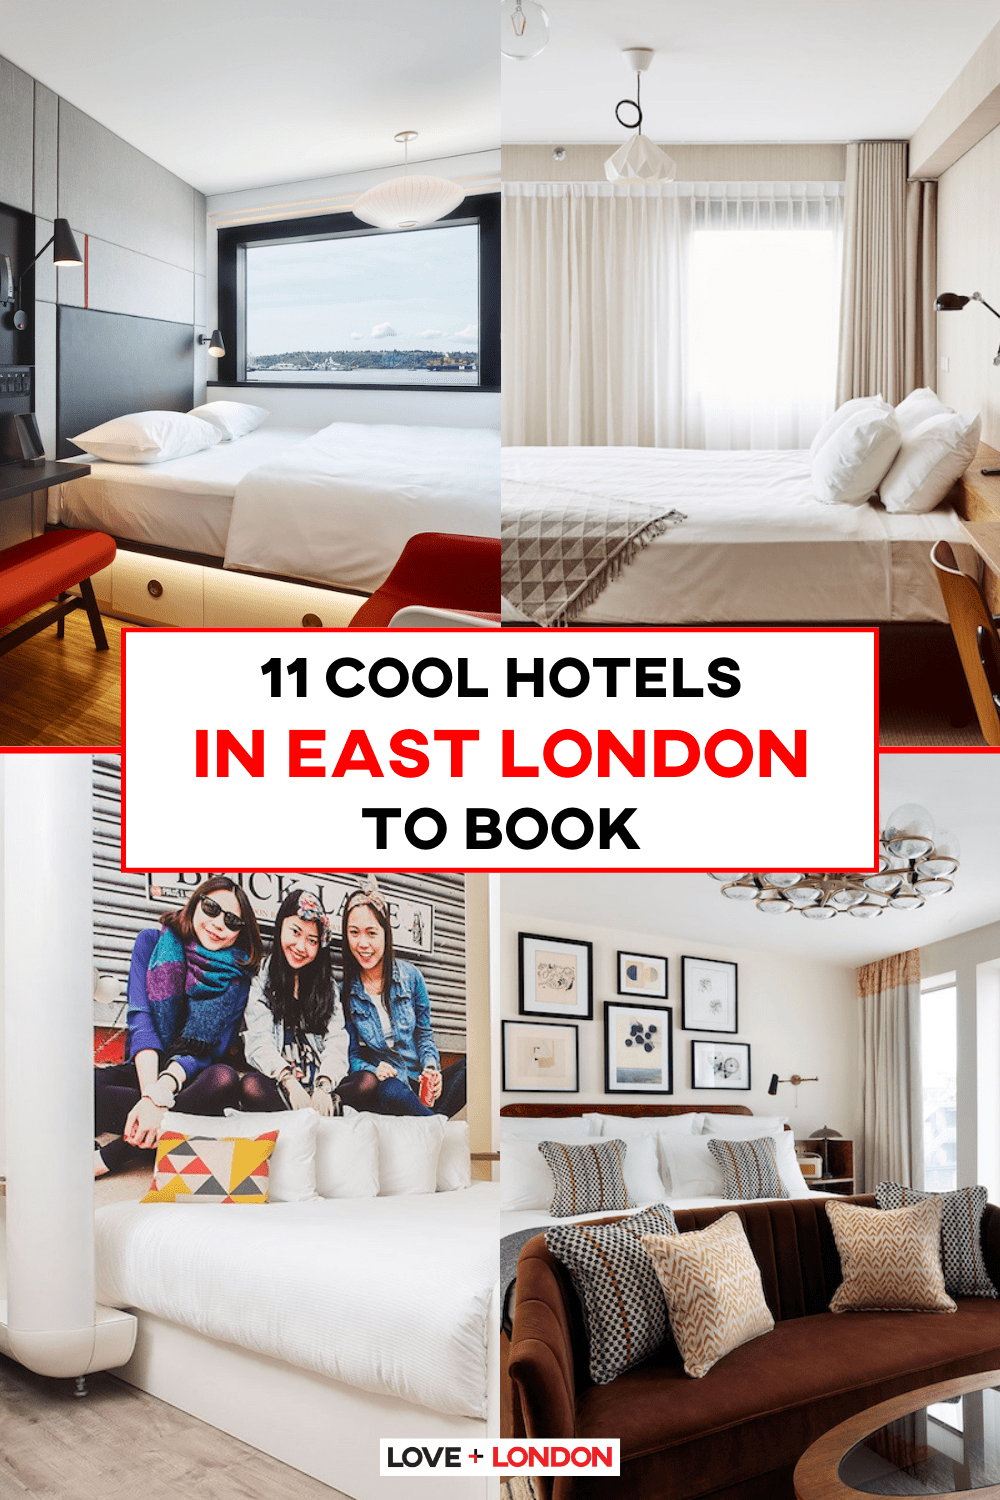 This is an image of a pinterest pin of four images of cool, modern hotels comprised in a grid format with text in the middle of the image that reads: 11 Cool Hotels in East London To Book 